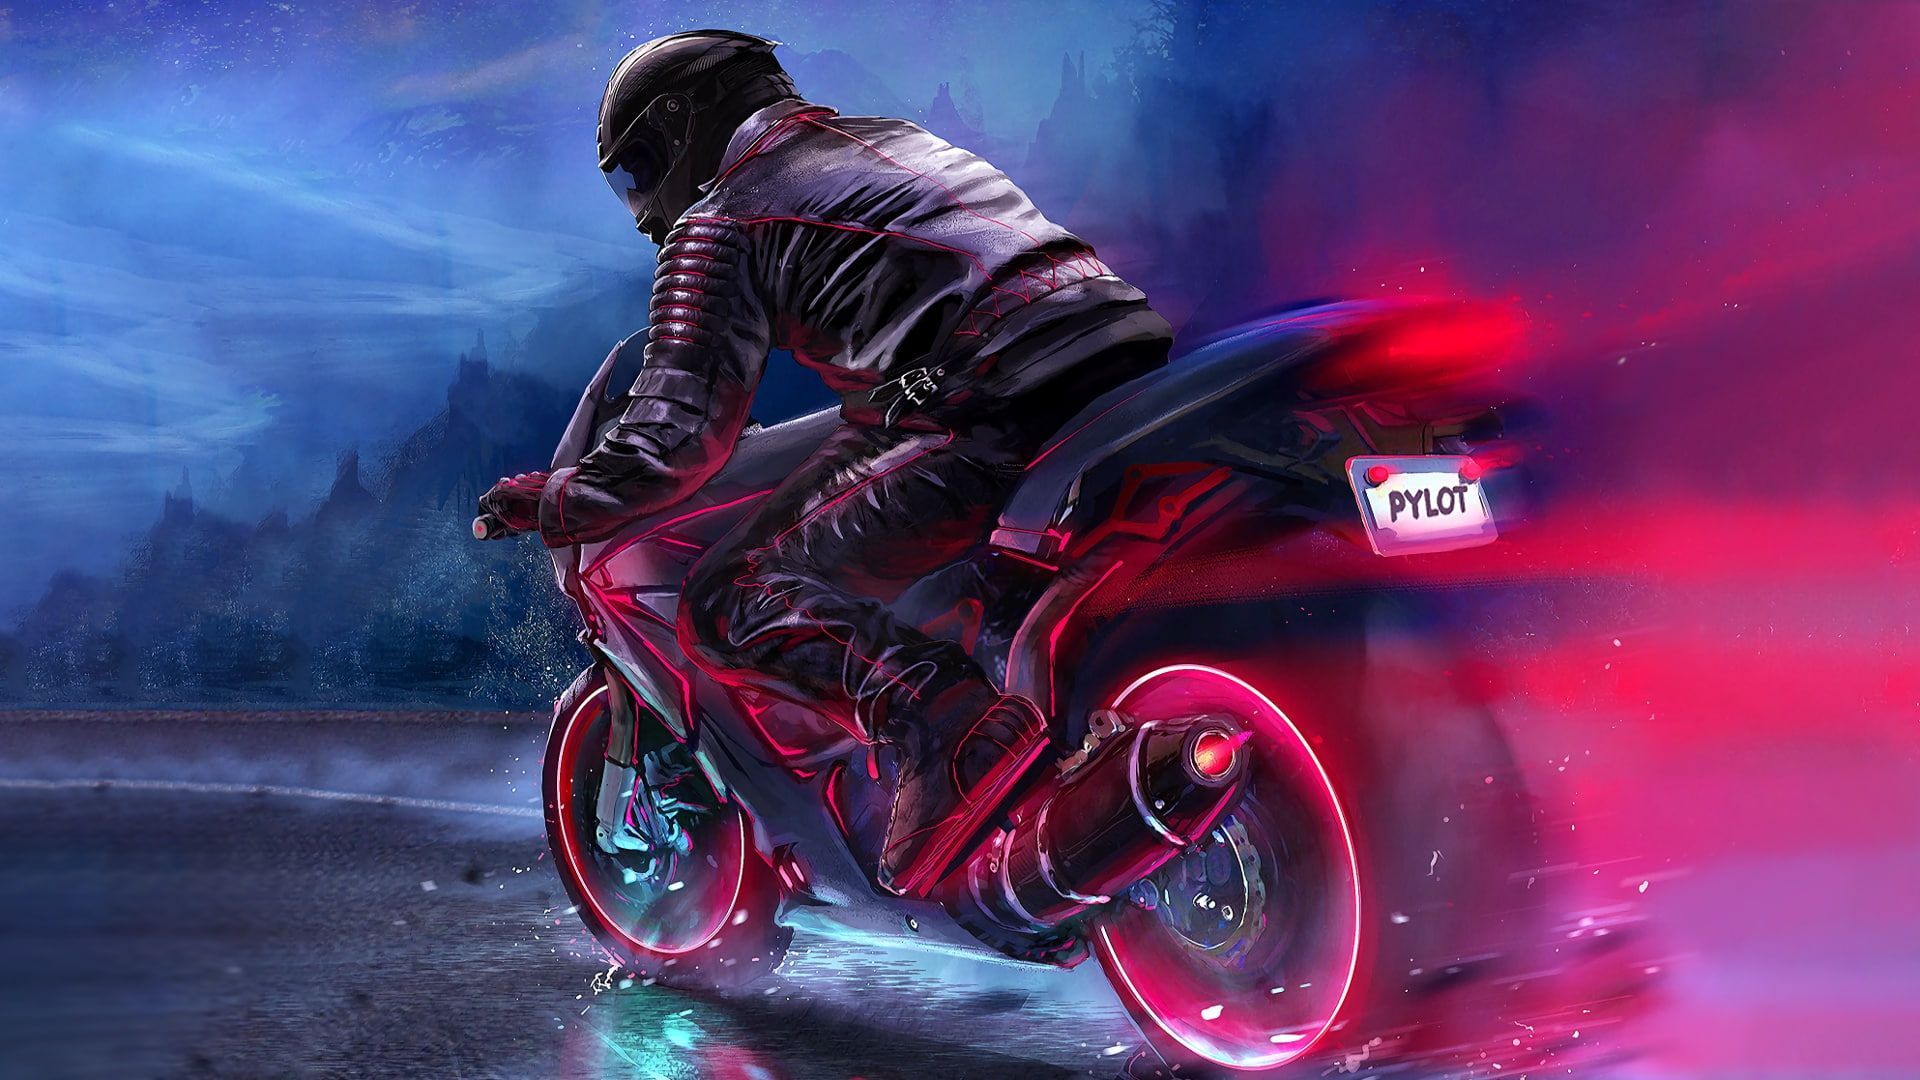 Neon Motorcycle Wallpaper Free Neon Motorcycle Background